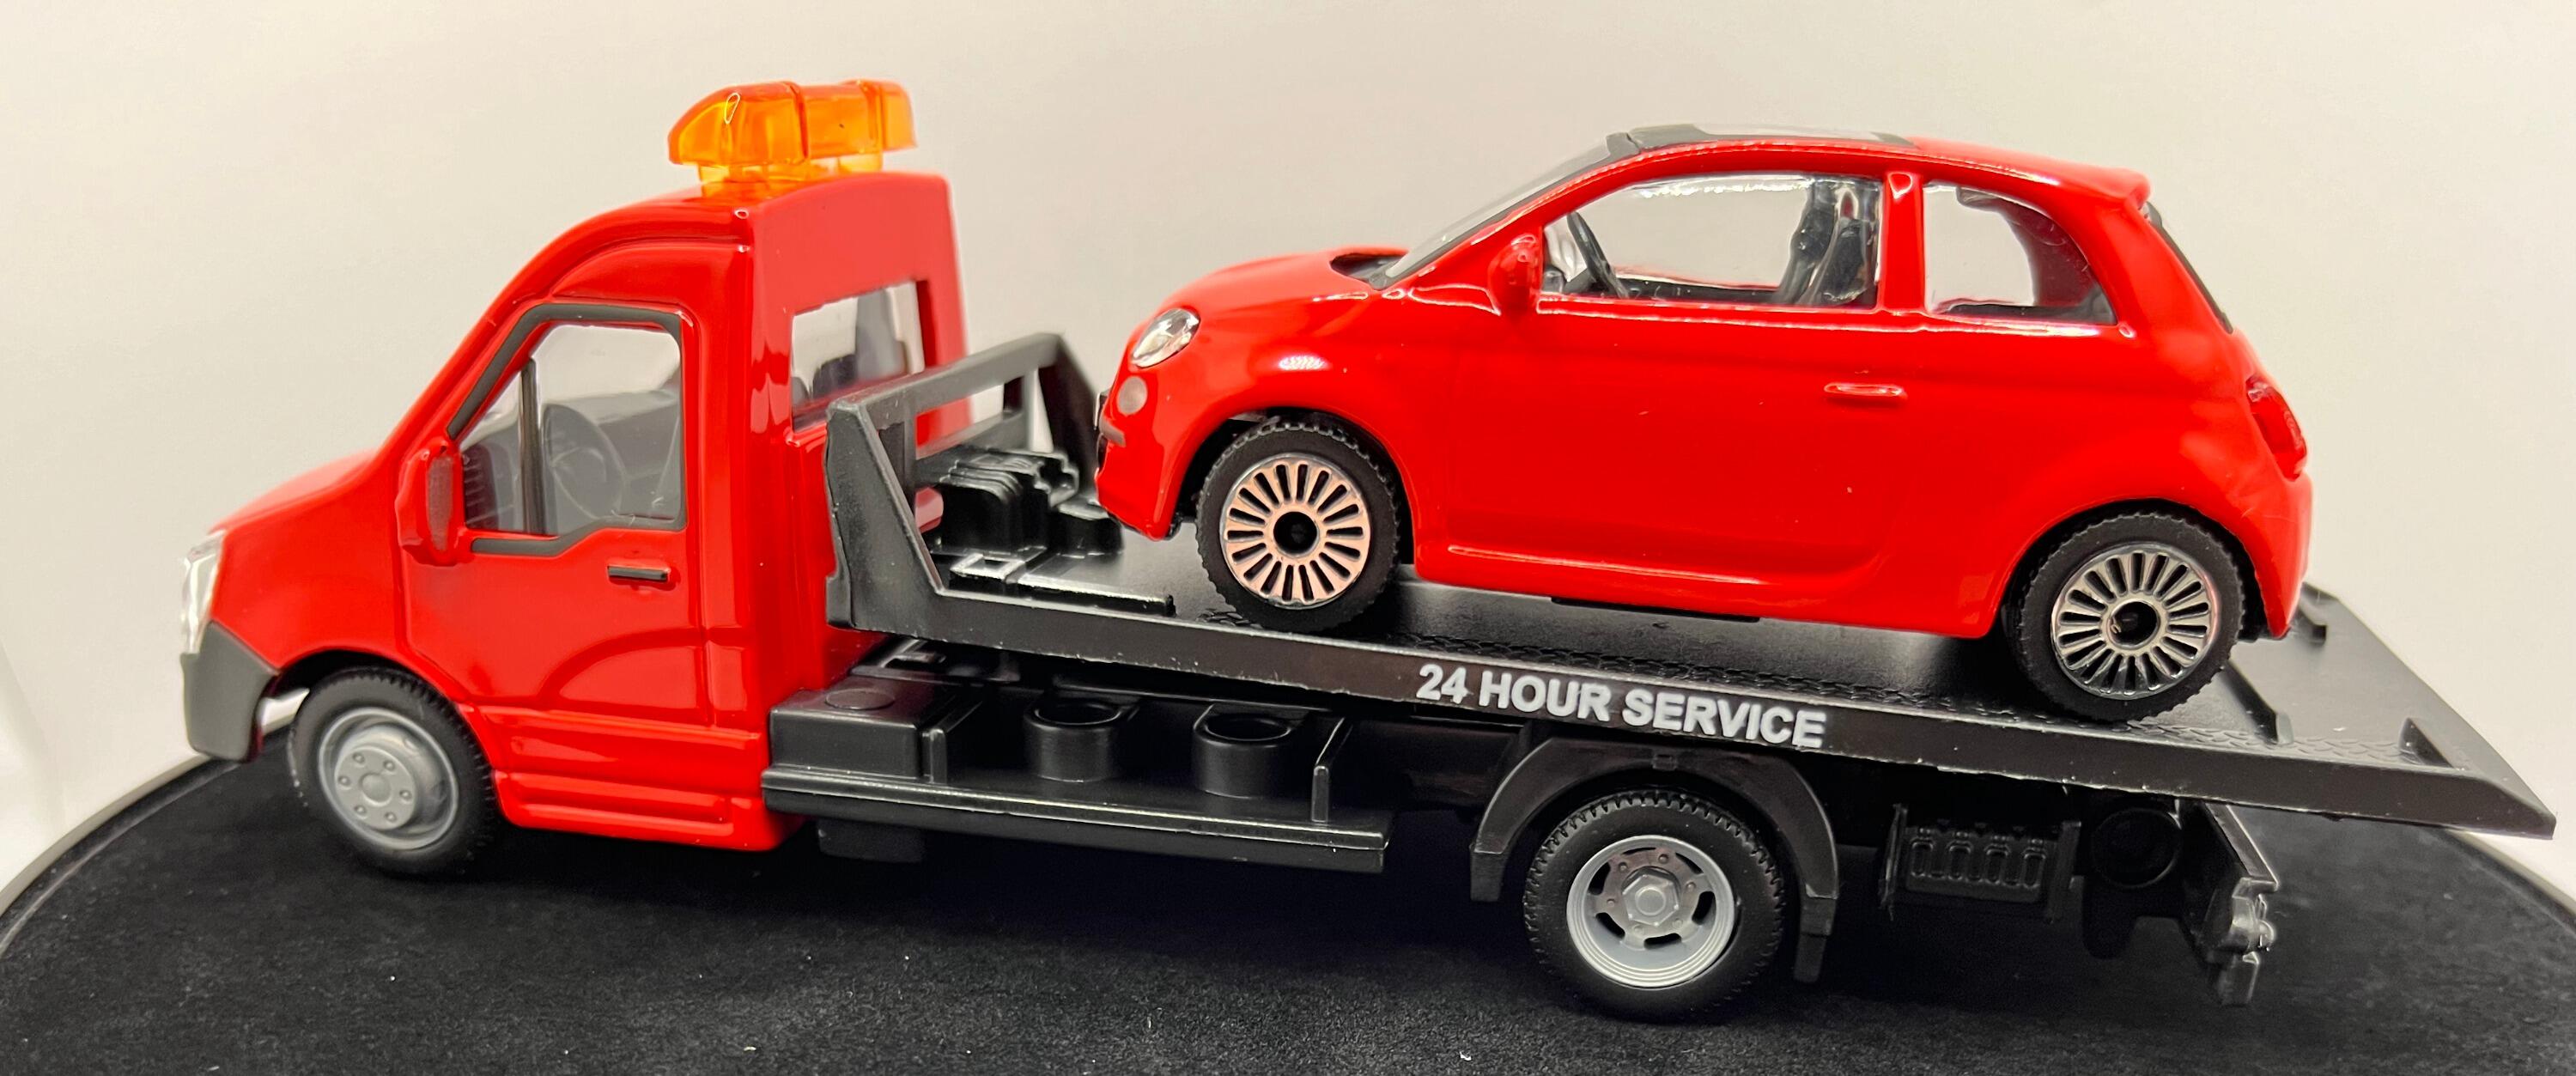 Flatbed Transporter with Fiat 500  in red, 1:43 scale diecast models from Bburago, BB18-31402